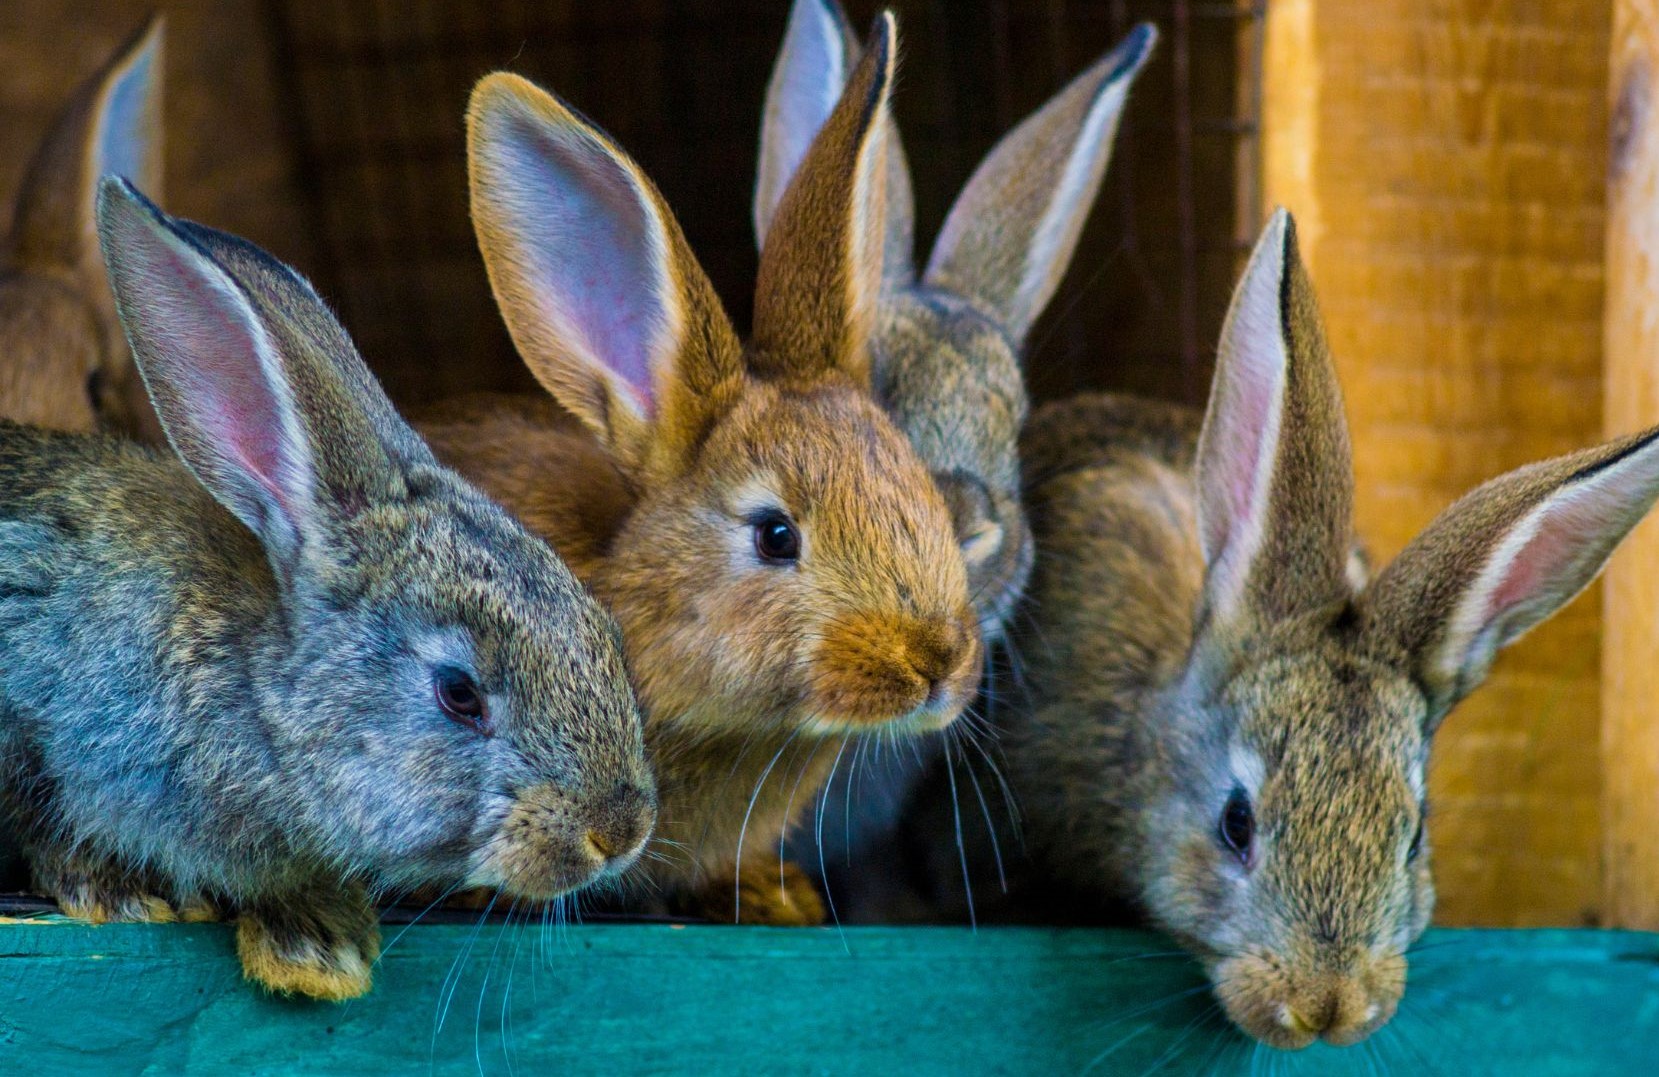 Rabbit Farming Essential Skills and Knowledge for a Successful Venture